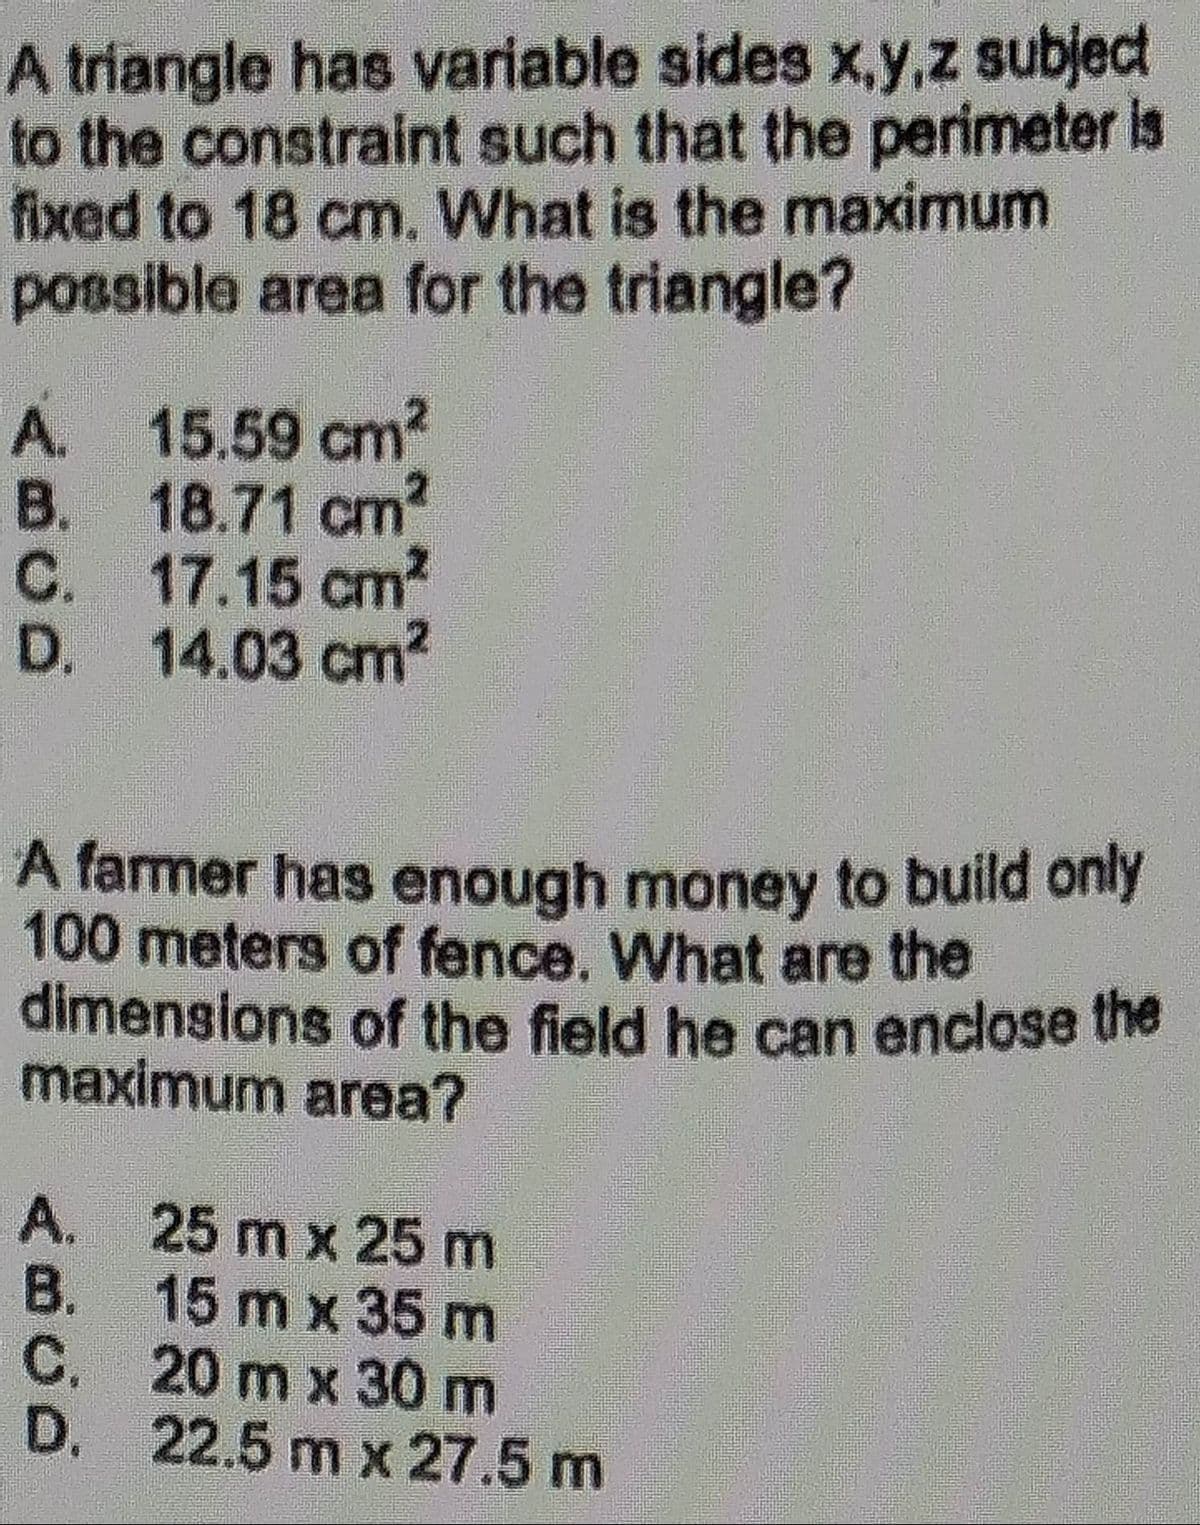 A triangle has variable sides x,y,z subject
to the constraint such that the perimeter is
fixed to 18 cm. What is the maximum
possible area for the triangle?
A.
B.
C.
D.
A farmer has enough money to build only
100 meters of fence. What are the
dimensions of the field he can enclose the
maximum area?
A.
15.59 cm²
18.71 cm2
17.15 cm²
14.03 cm²
B.
C.
D.
25 m x 25 m
15 m x 35 m
20 m x 30 m
22.5 m x 27.5 m